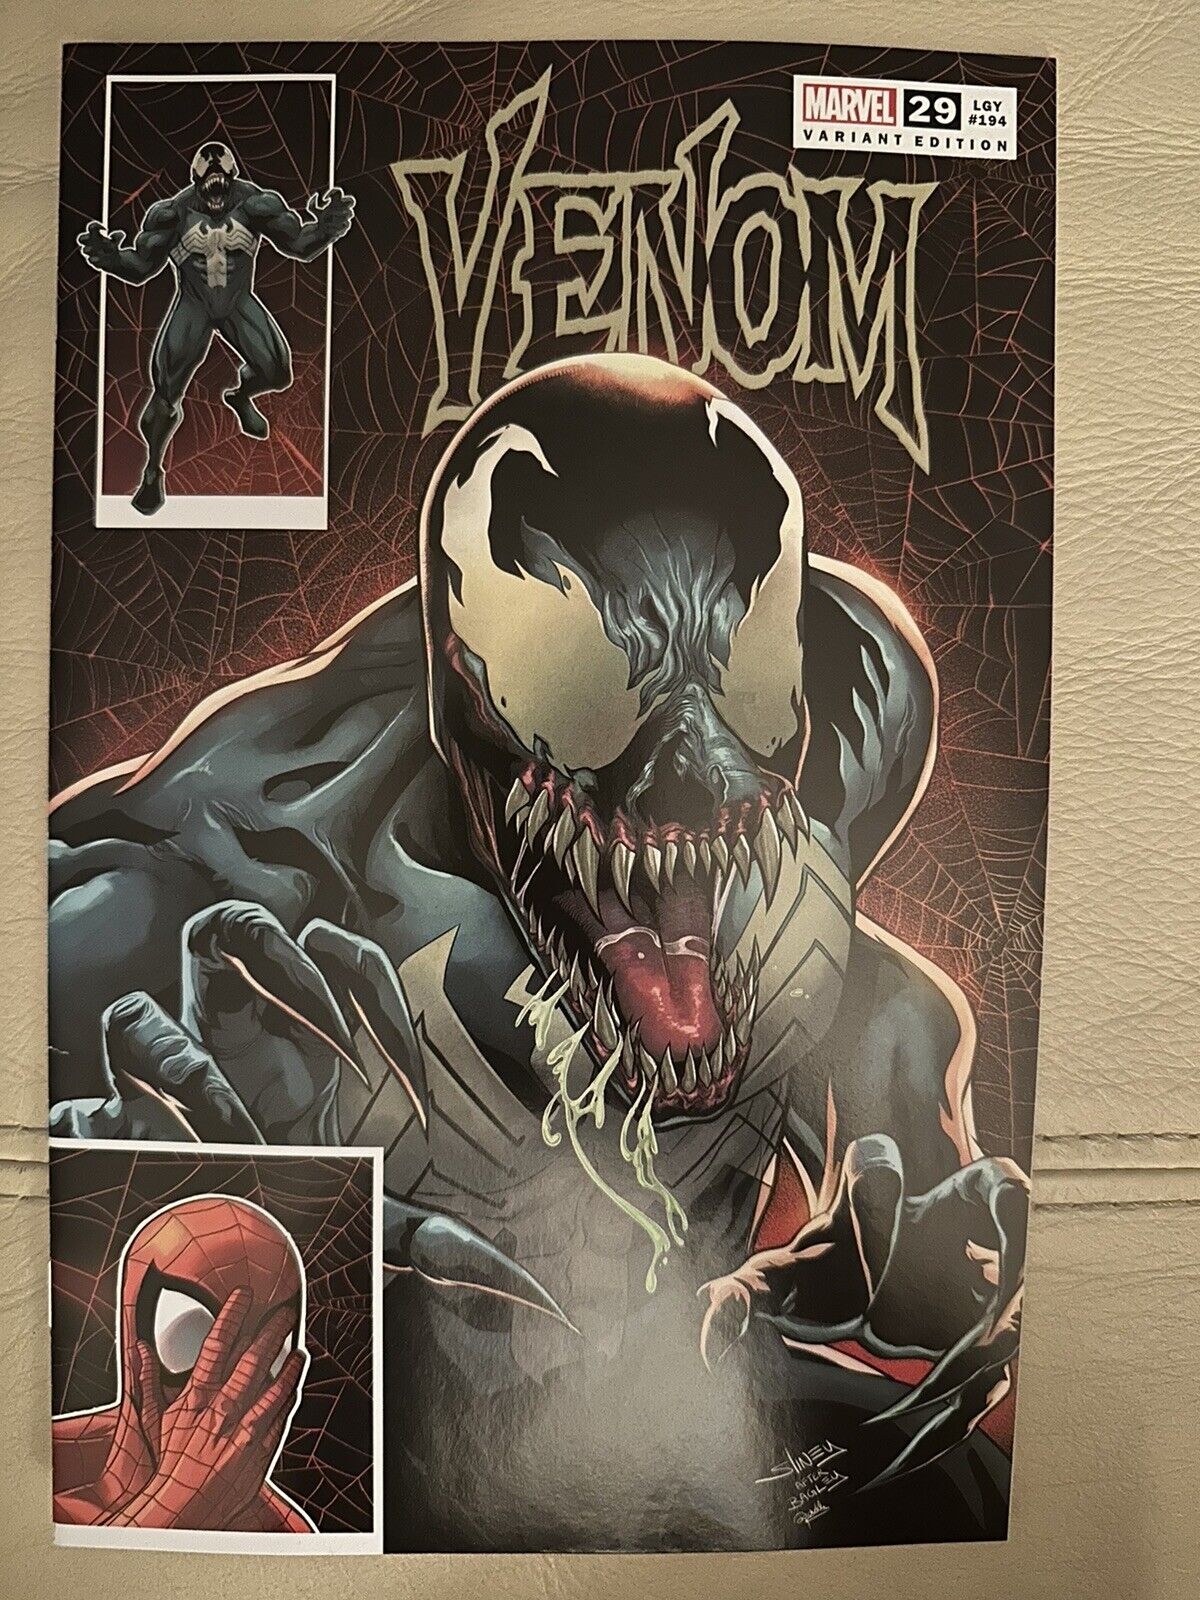 VENOM #29 LGY#194 WILL SLINEY LETHAL PROTECTOR EXCLUSIVE 1 RARE Marvel Comic